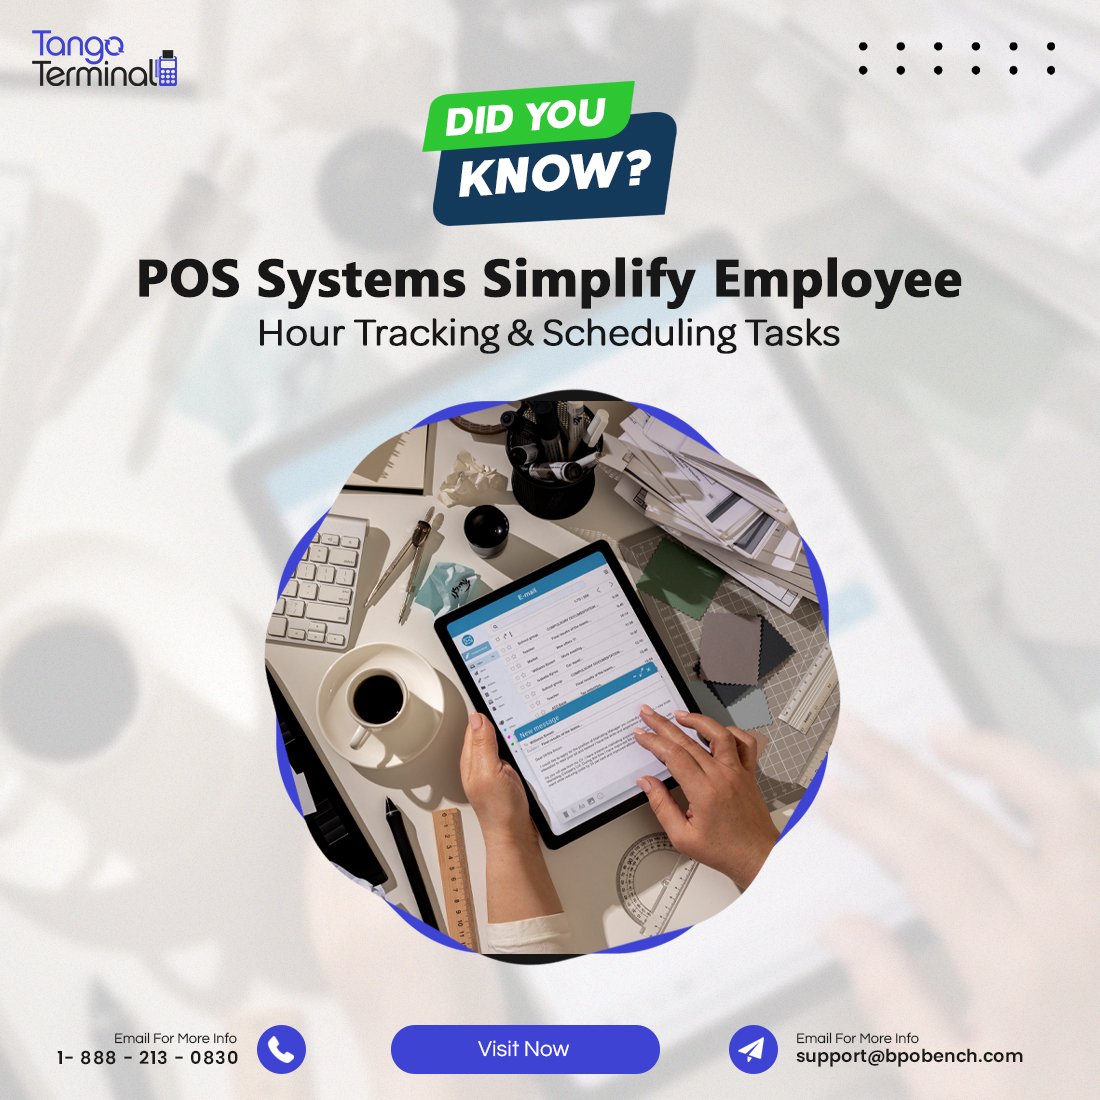 You can track your employees’ hours, create schedules, and log requested time off for each employee through our POS system.

#tangoterminal #pos #retailbusiness #automatingtasks #marketingsolution #ecommerce